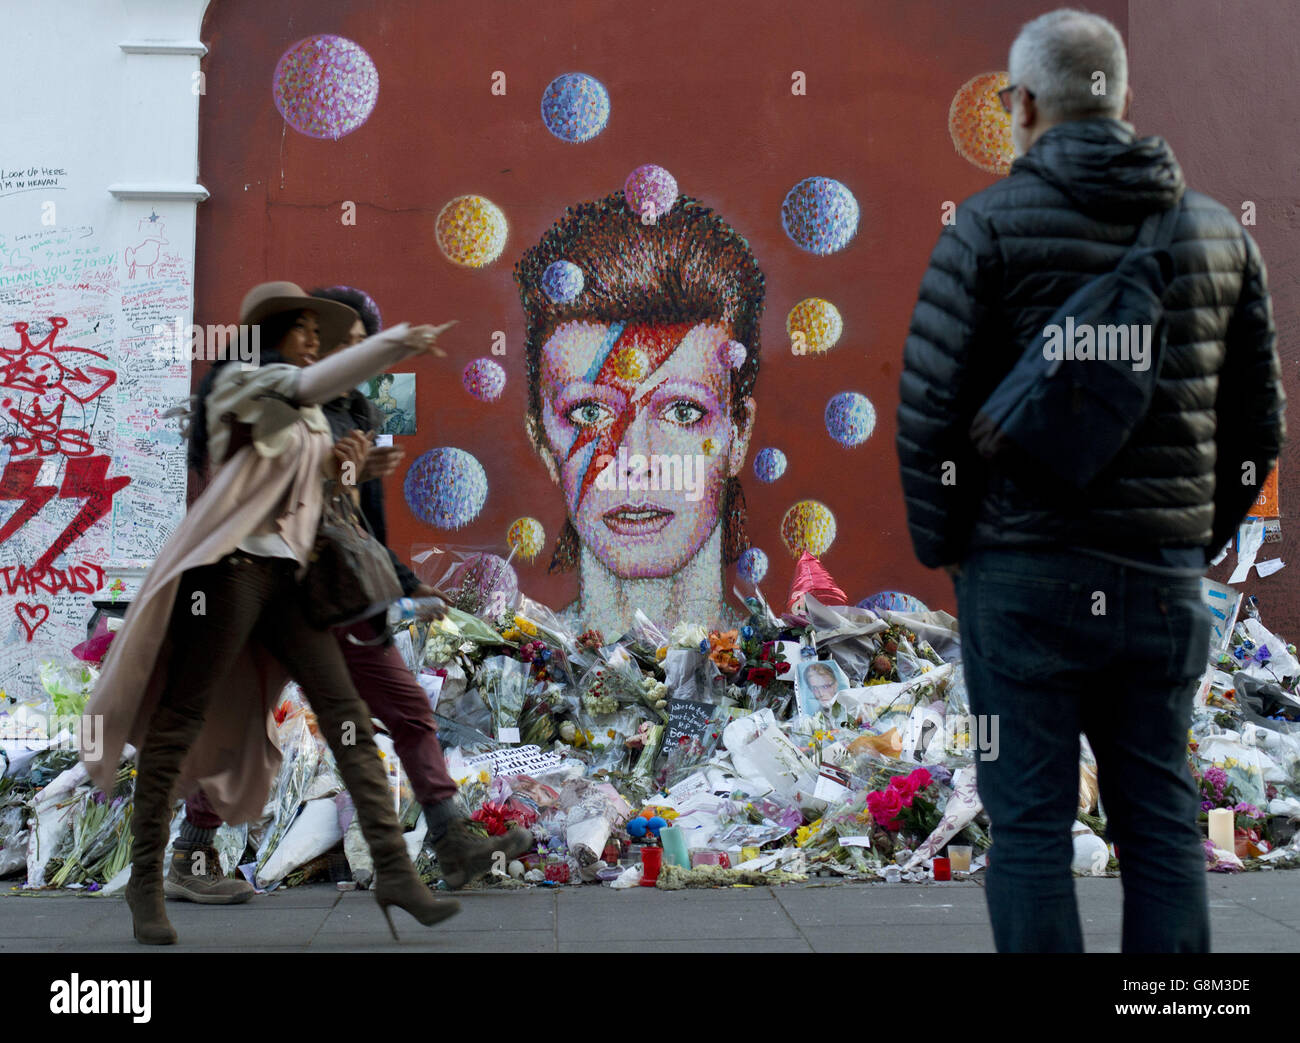 People walk past a mural of David Bowie, who died of cancer on January 10 2016, in Brixton, London, on World Cancer Day. Stock Photo